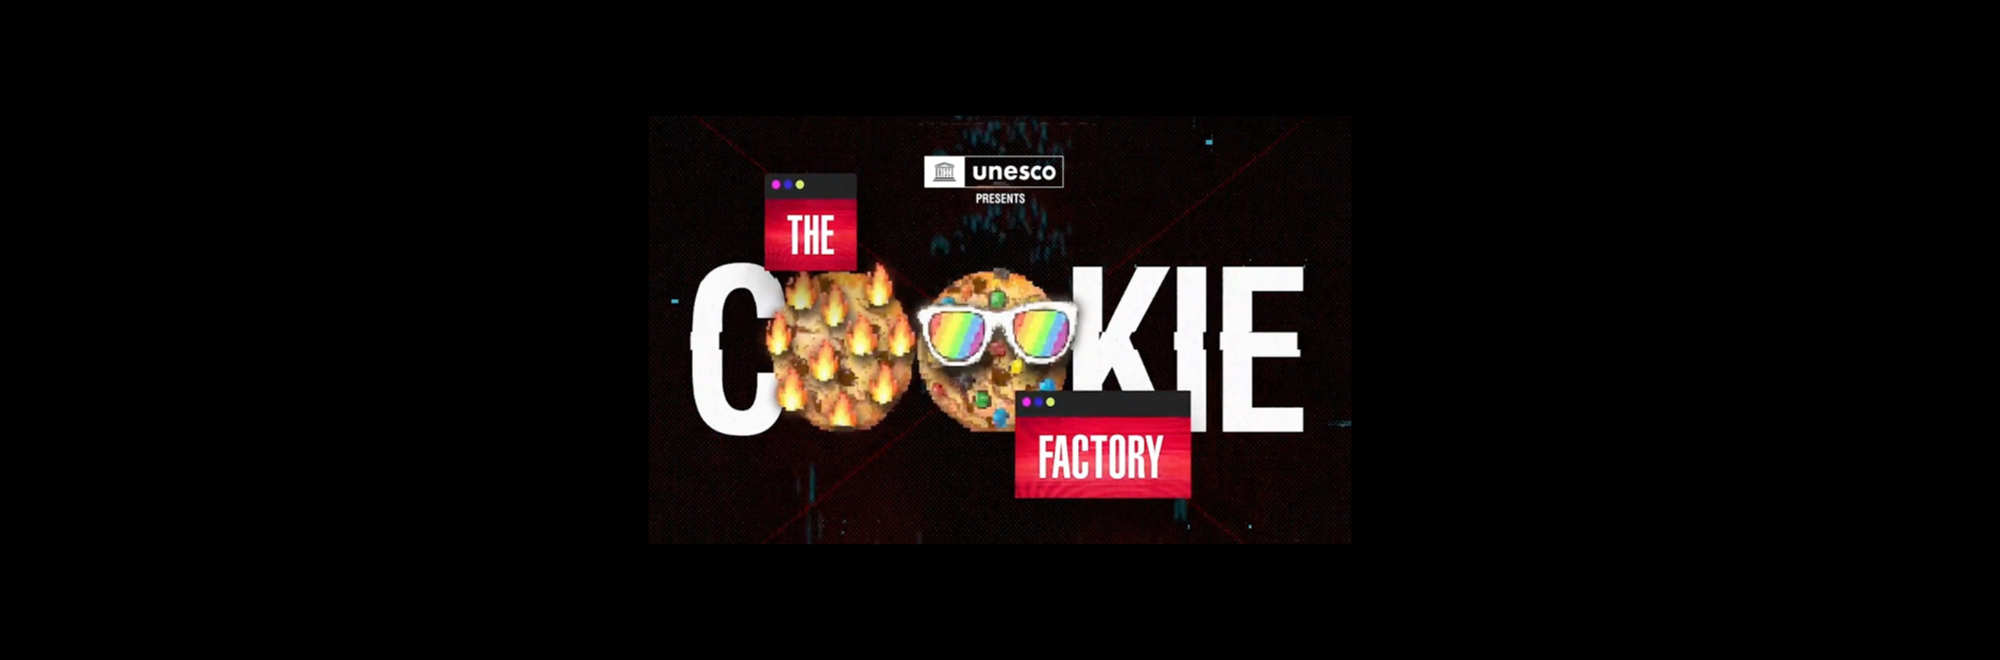 UNESCO launches the Cookie Factory raising awareness of the potential risks and ethical challenges of AI